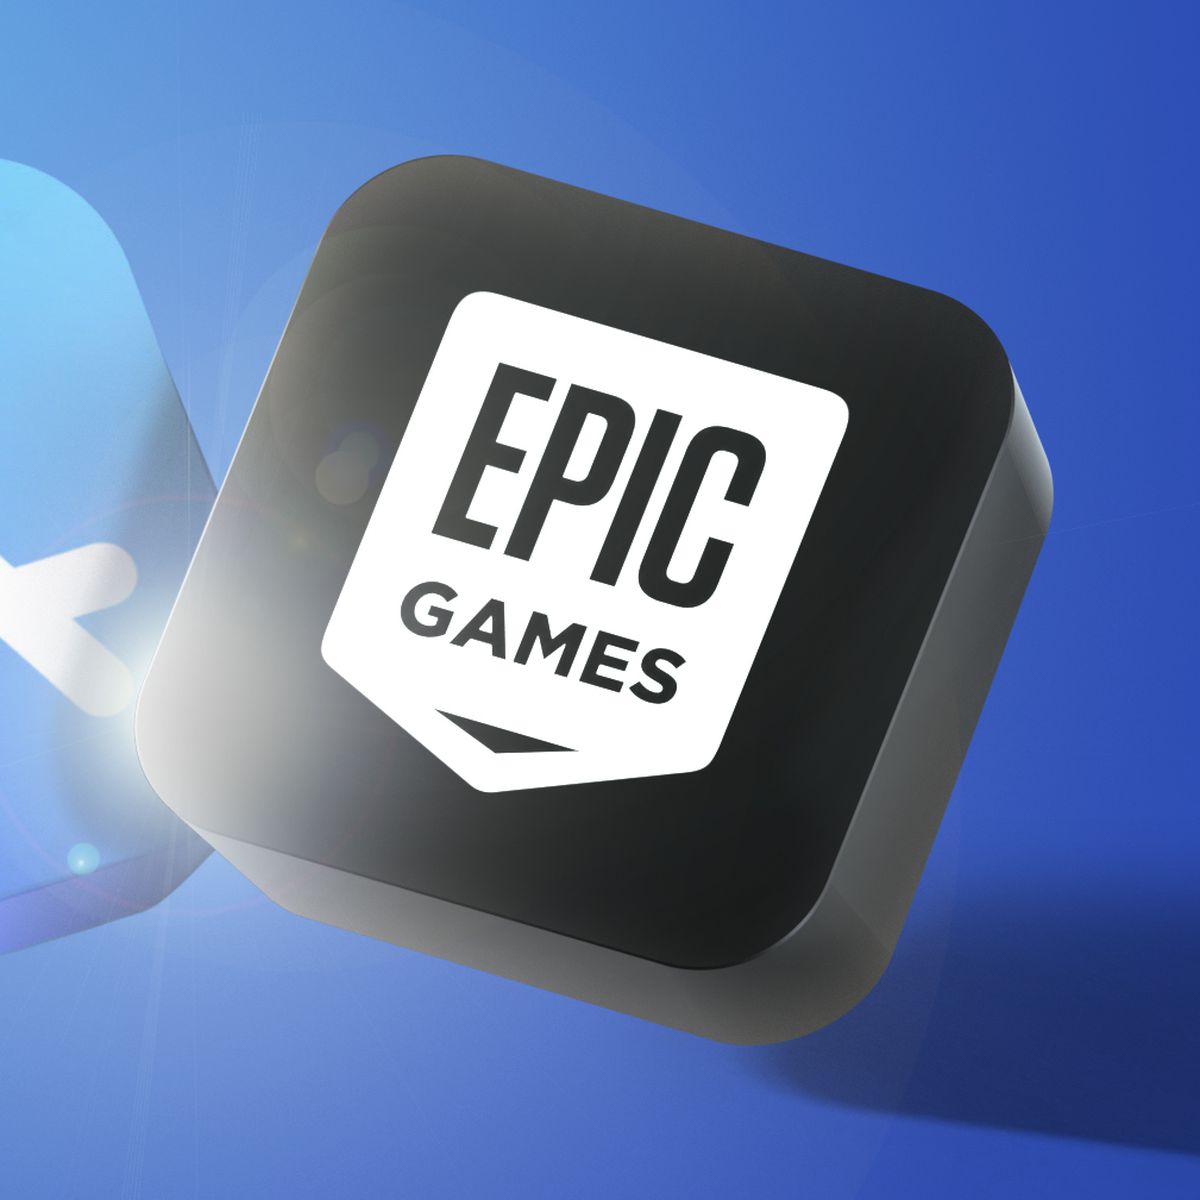 Apple bars 'Fortnite' from App Store, Epic Games CEO says